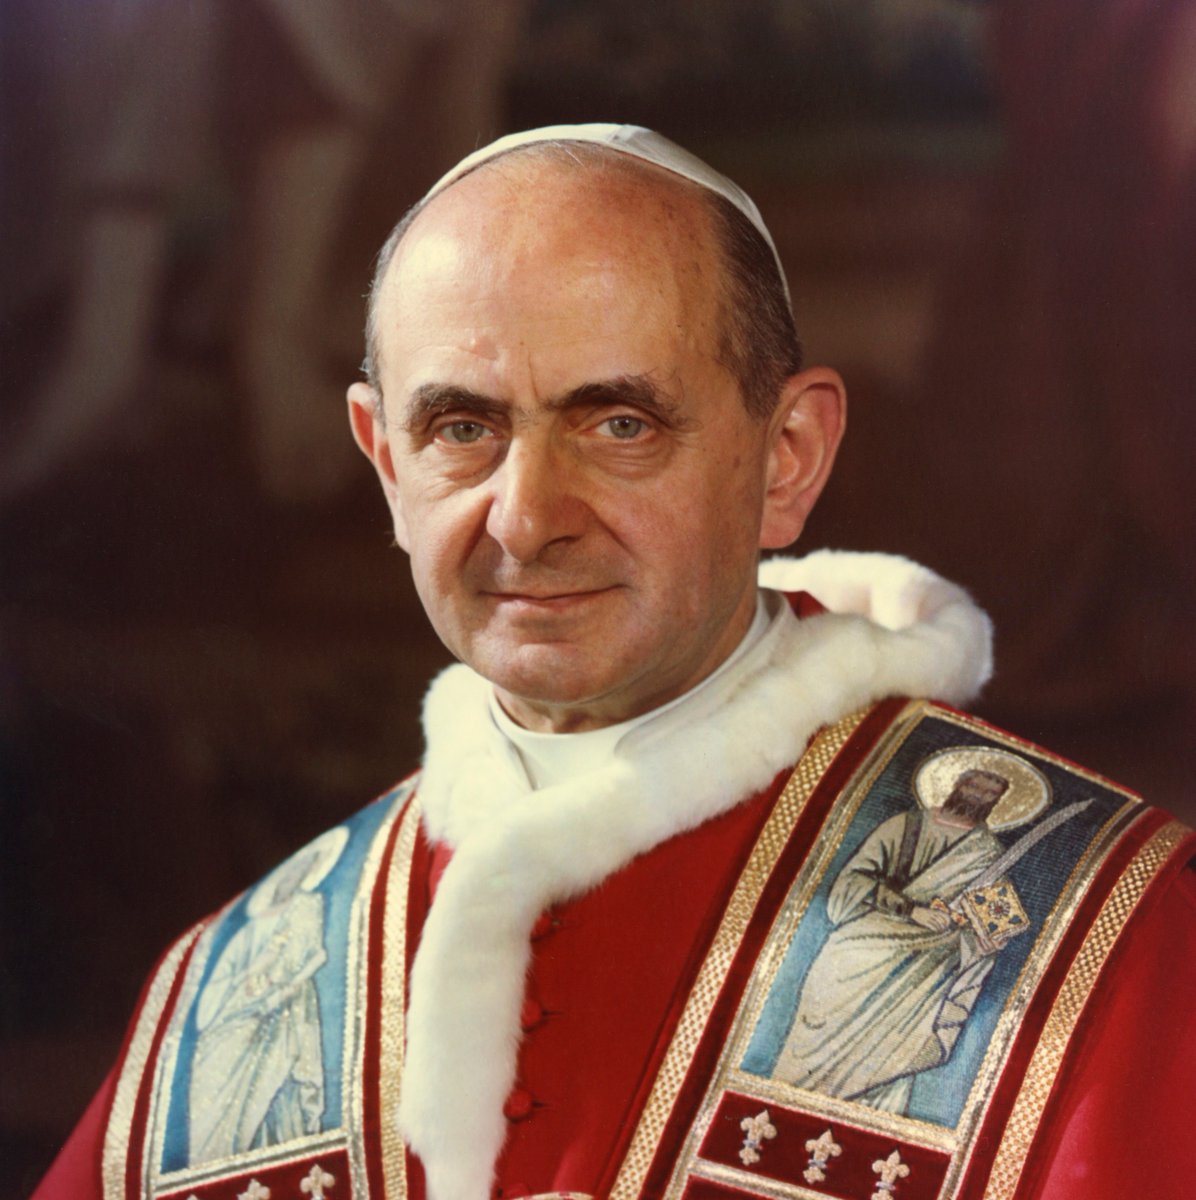 “Of all human activities, man's listening to God is the supreme act of his reasoning and will.” - Pope Saint Paul VI (+1978)

Happy feast of Pope Saint Paul VI! 

#Catholic #Catholicism #CatholicChurch #FeastDay #Scripture #Tradition #PrayForUs #HolyMenAndWomen